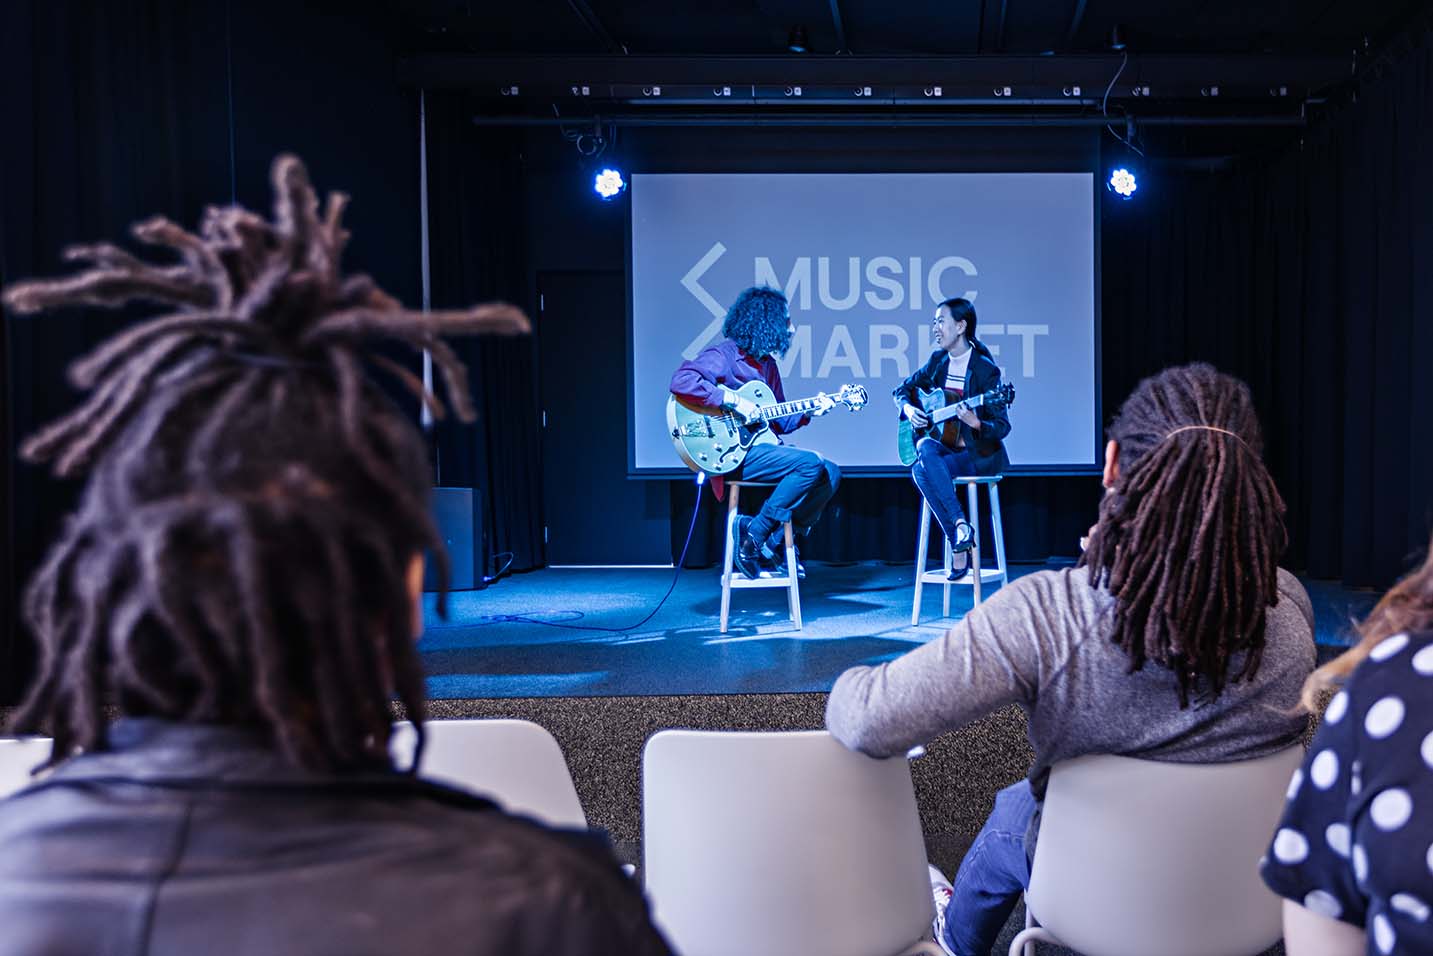 Photo from the perspective of the crowd in Music Market event space. In the centre is a blue-lit stage with two people playing guitar on stools. Behind them is a projector screen that says Music Market in white writing.